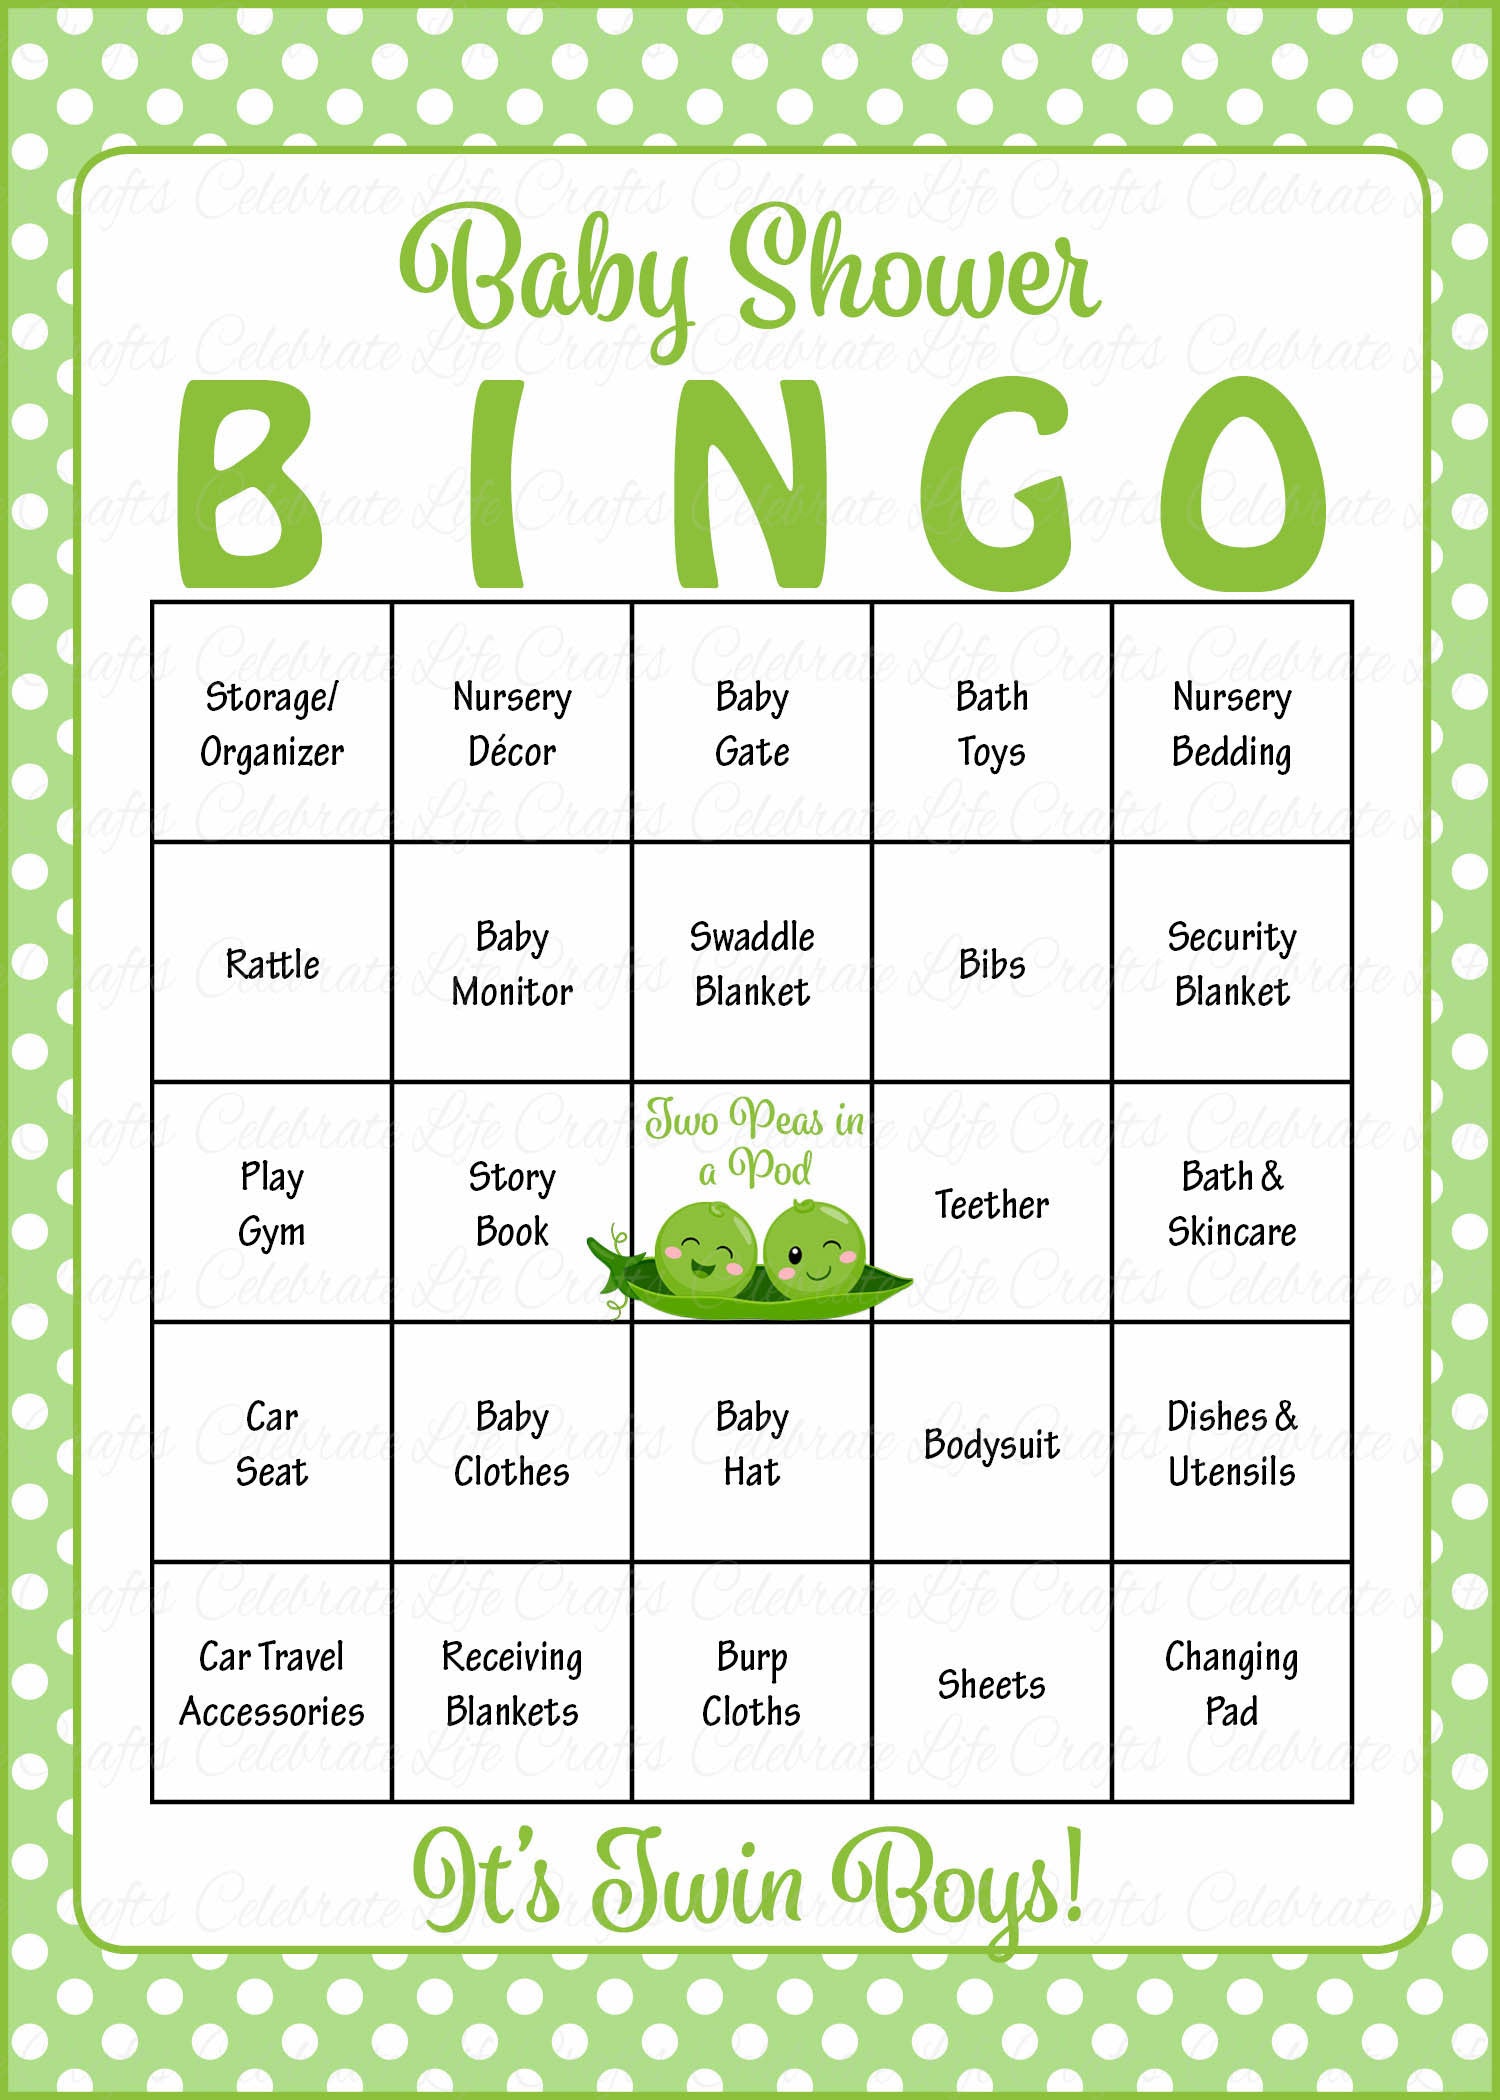 peas-in-a-pod-baby-shower-game-download-for-boy-twins-baby-bingo